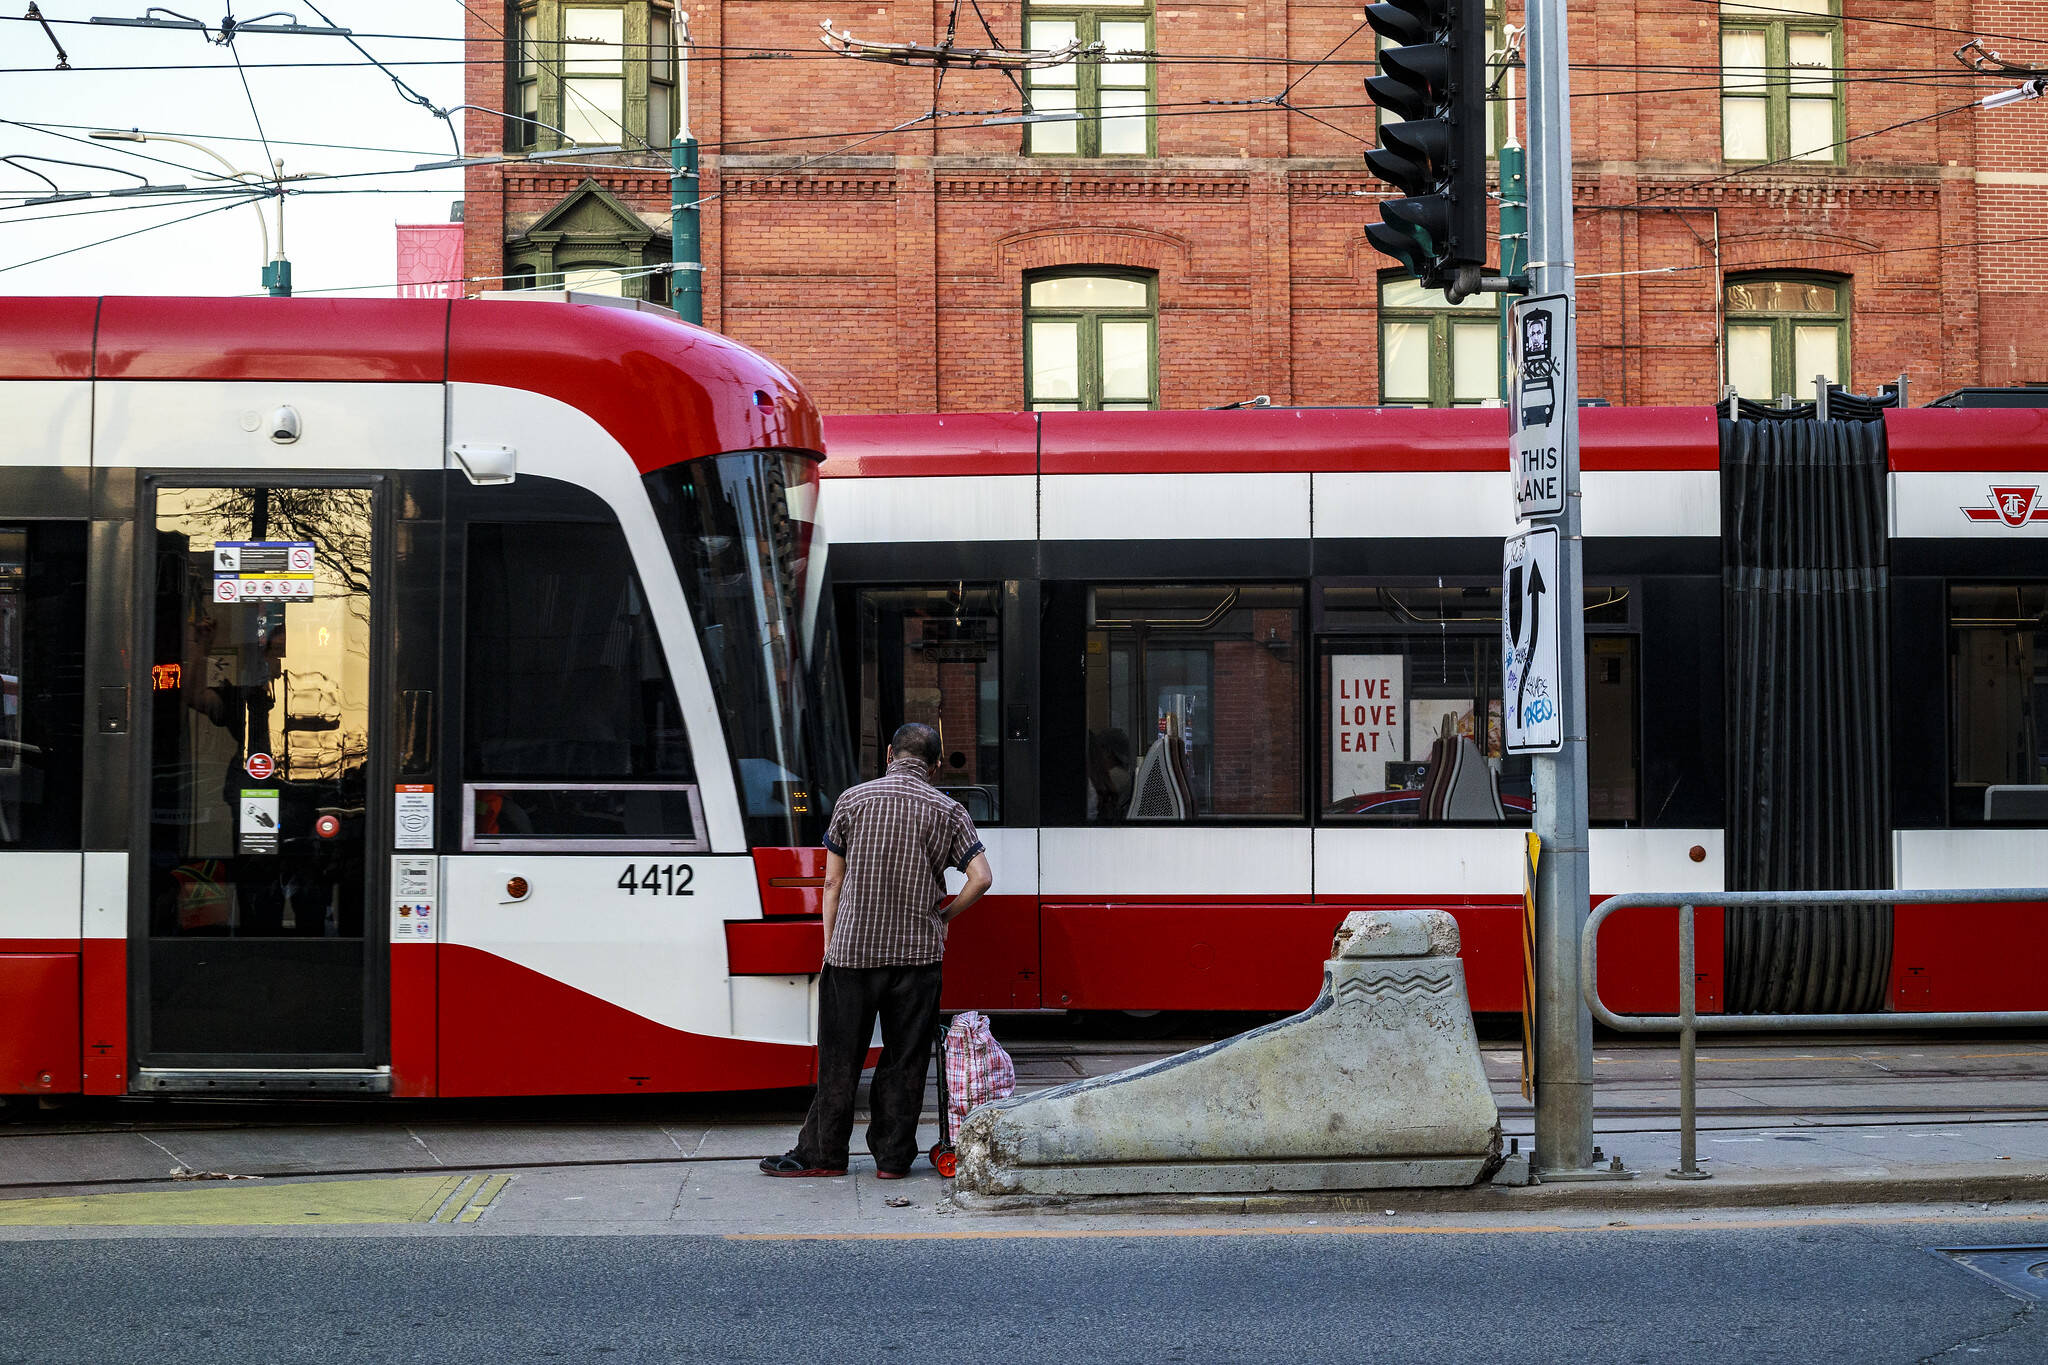 File:Articulated UTDC streetcar at the Long Branch loop, 2013 02 23.JPG -  Wikimedia Commons